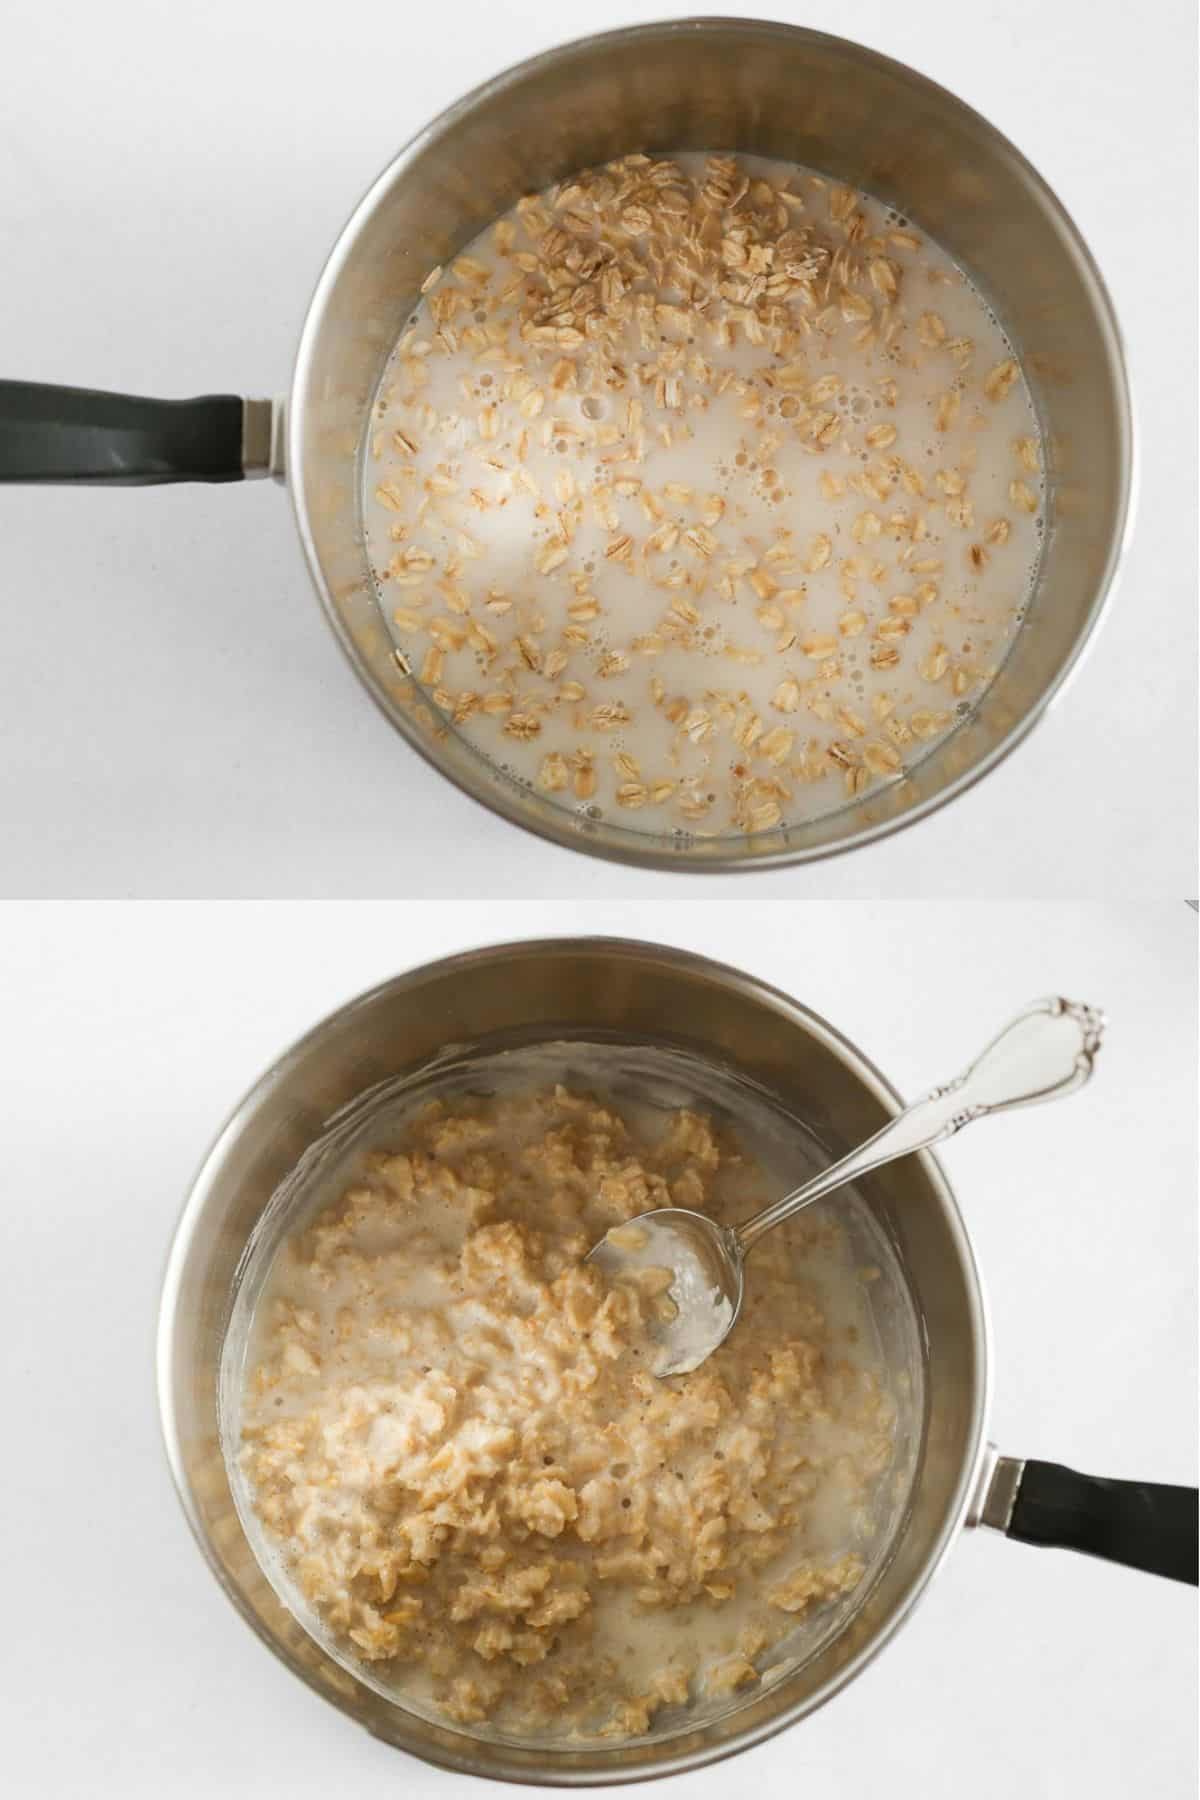 Oatmeal in a pot with milk before and after cooking.